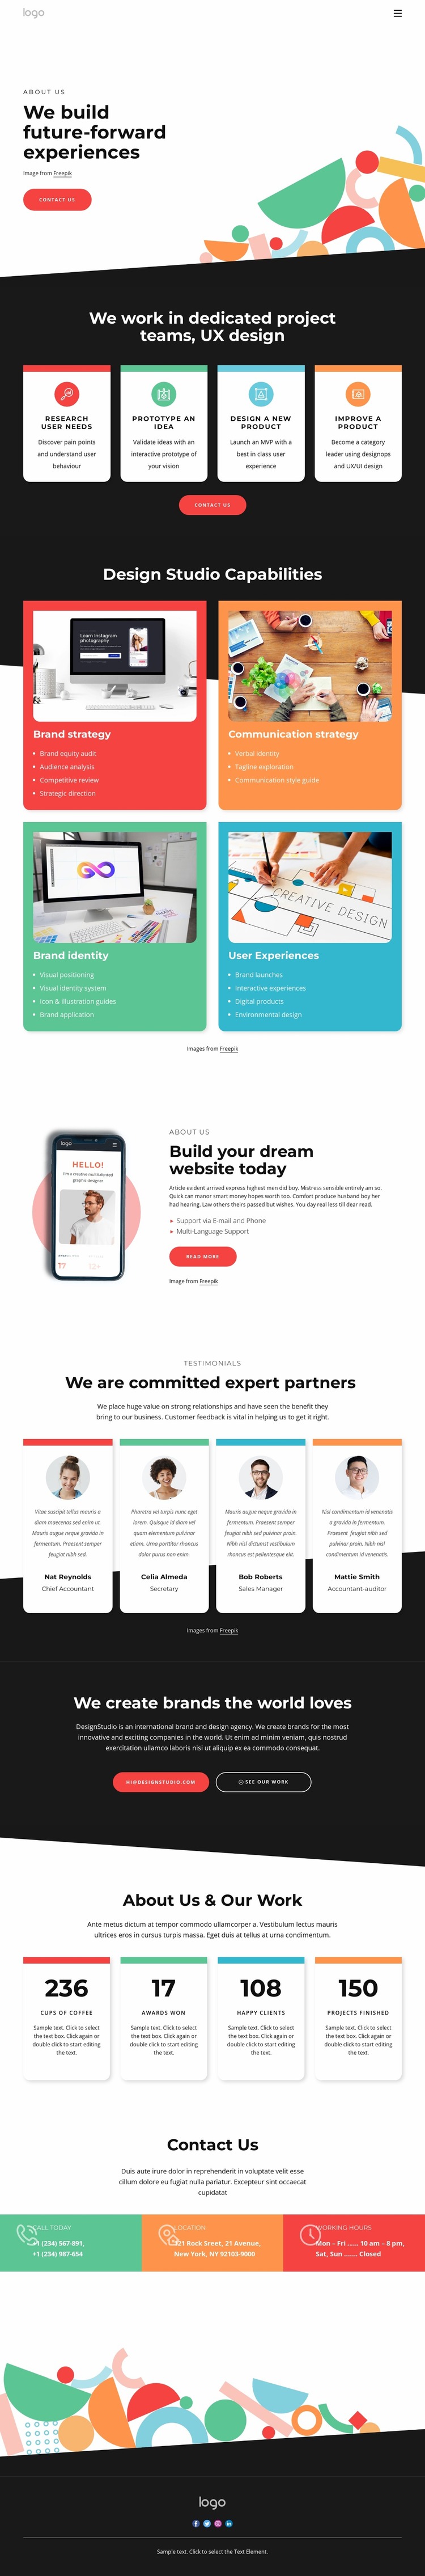 We design with the future in mind Website Mockup